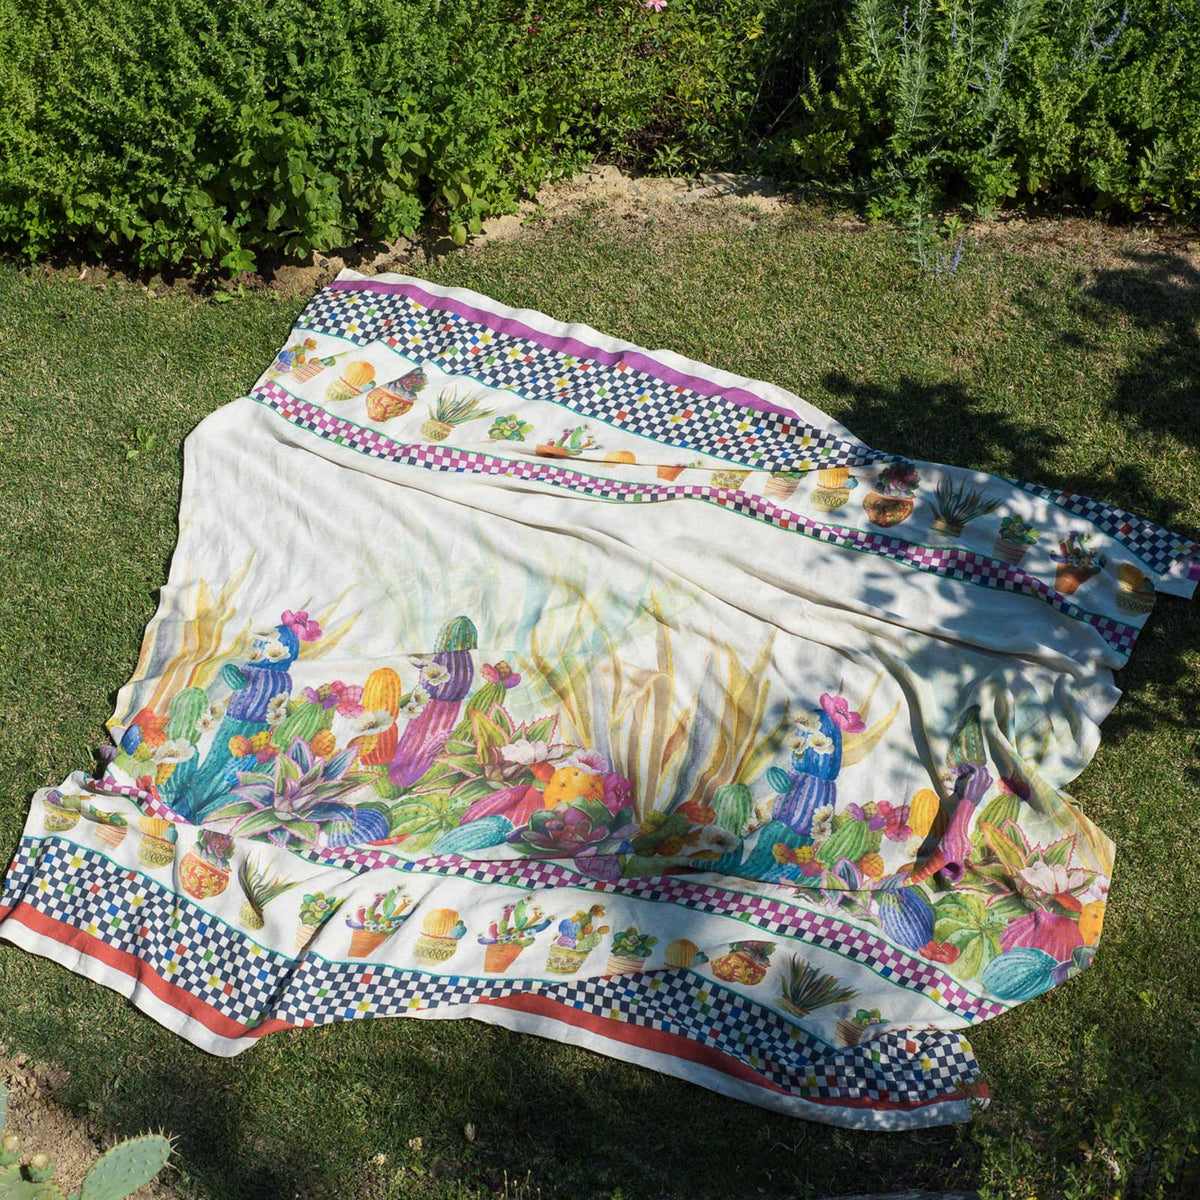 Bedspread in Pure Linen printed Floral Patterned  - Kactus